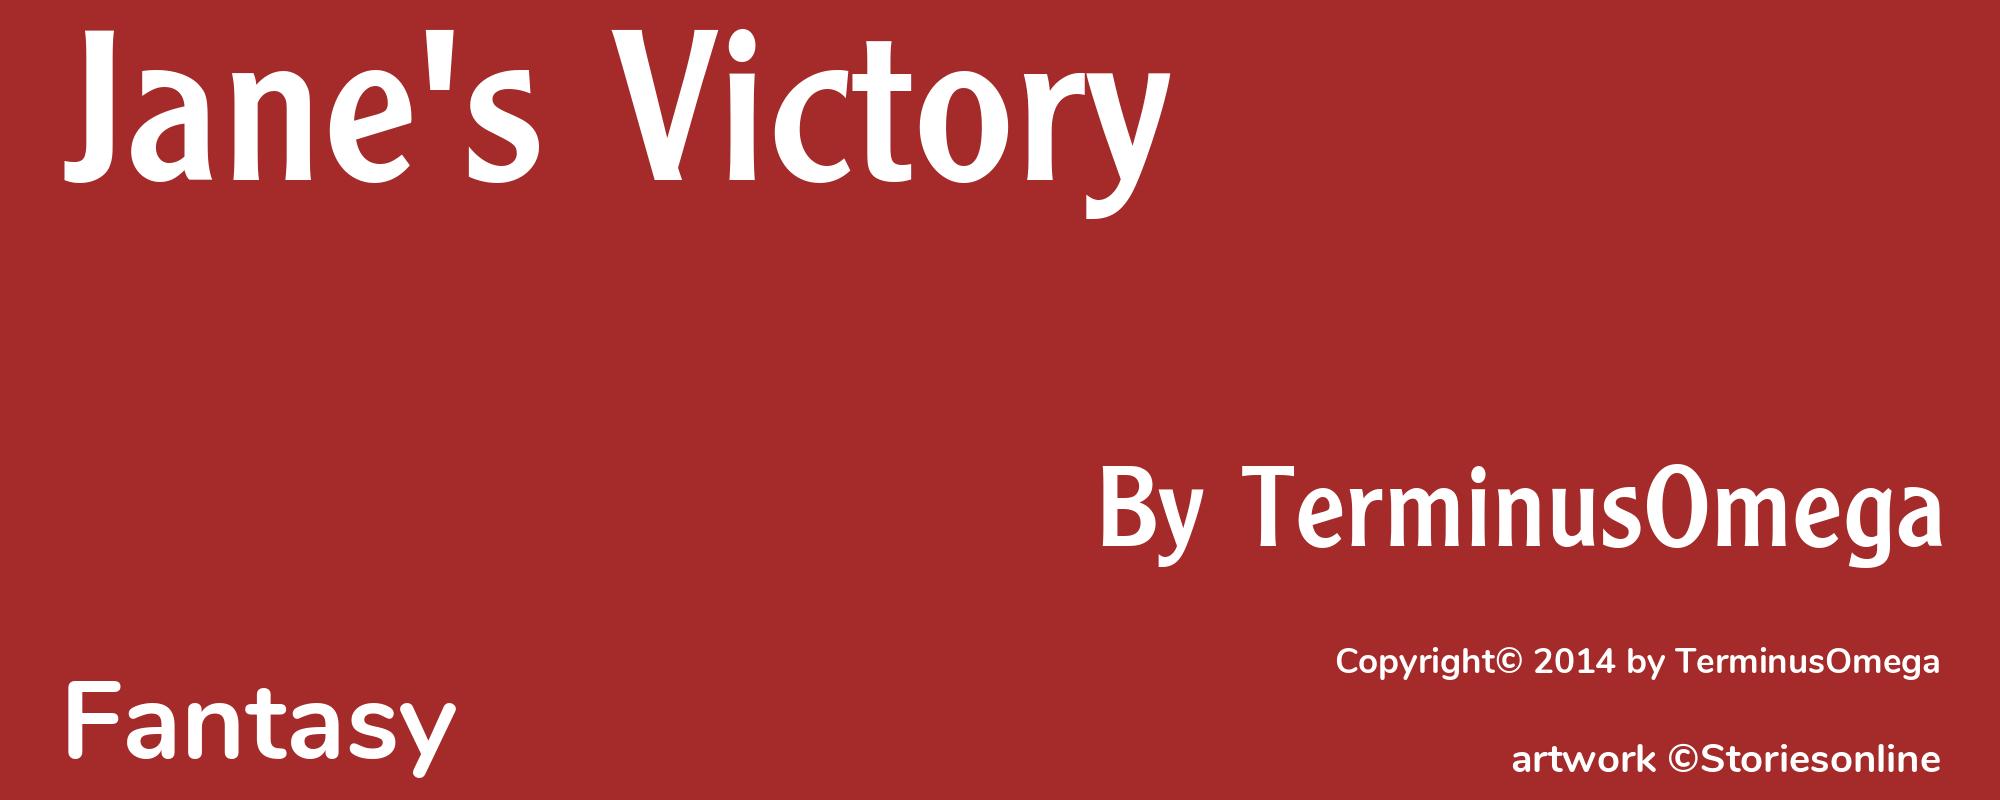 Jane's Victory - Cover